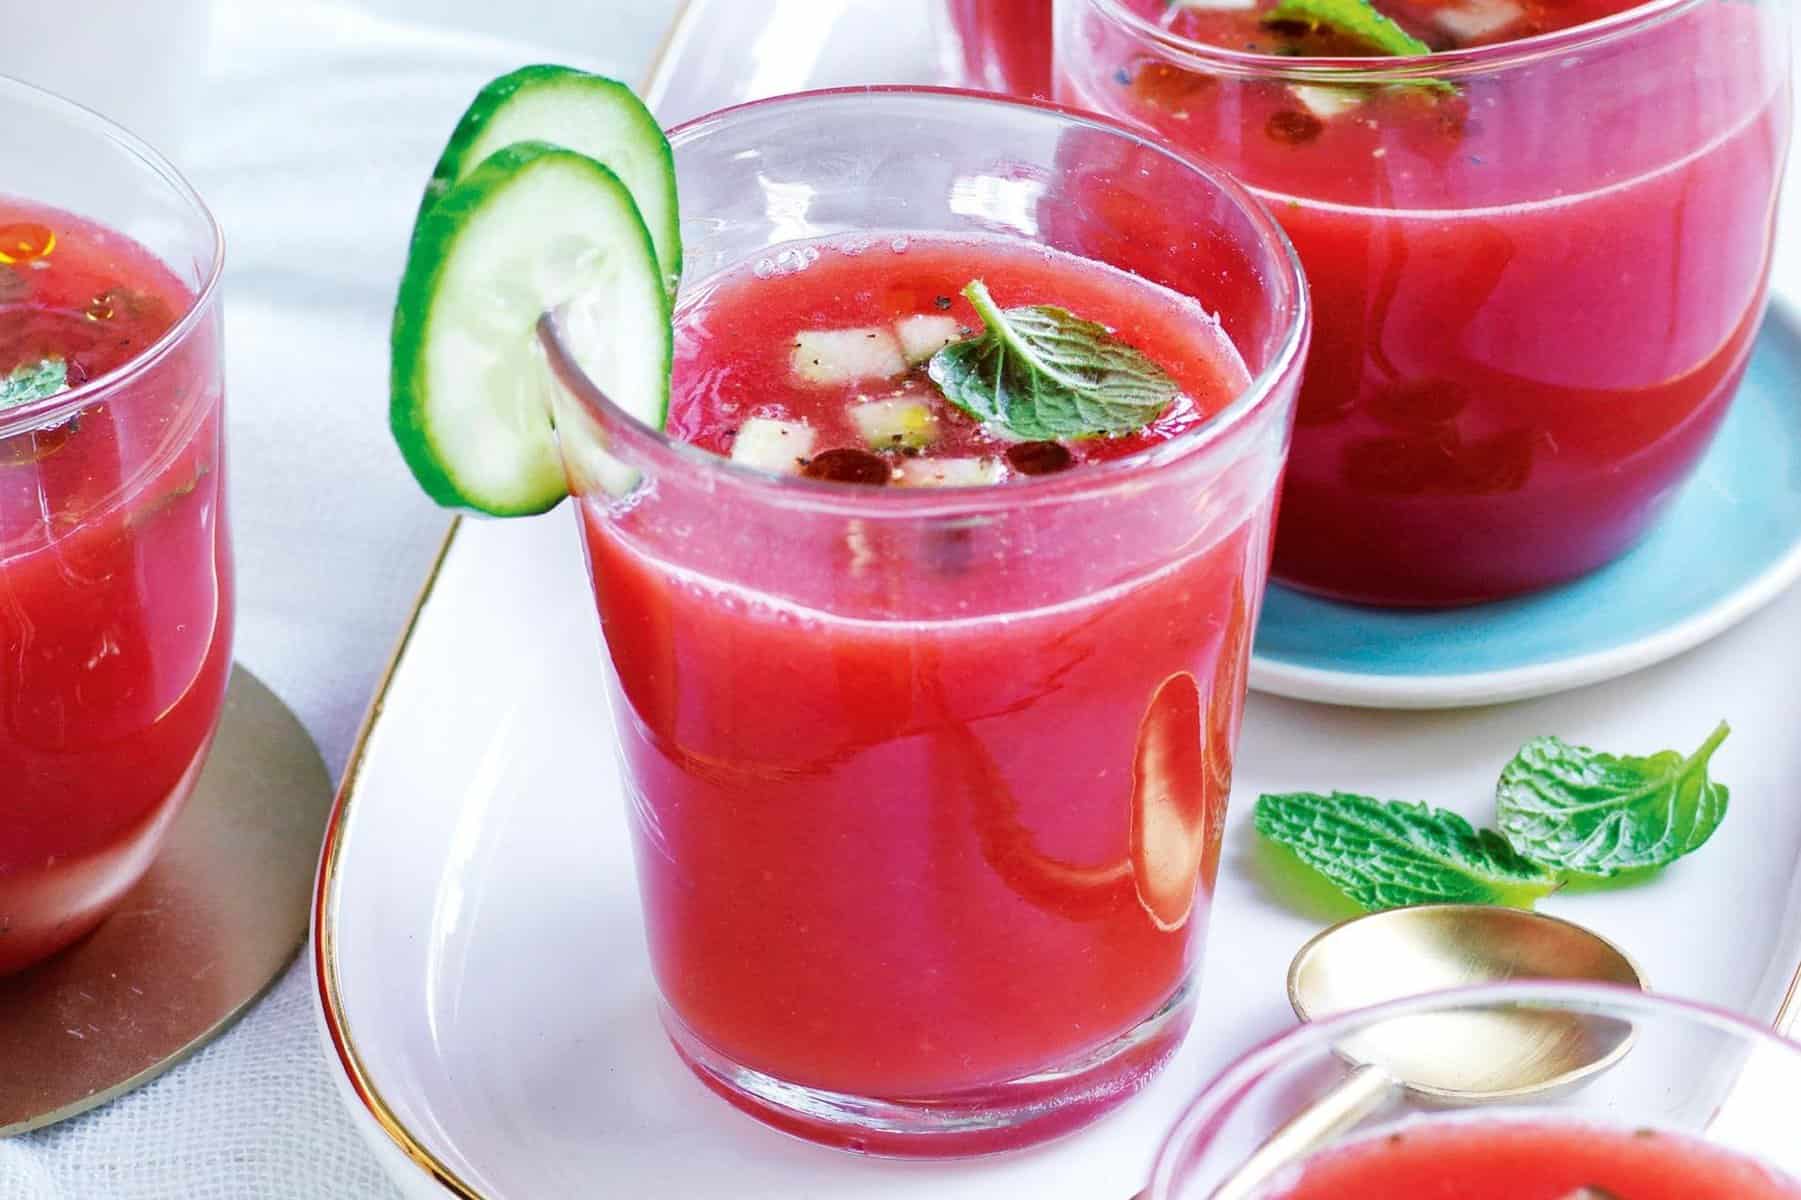  A great way to use up any leftover watermelon.